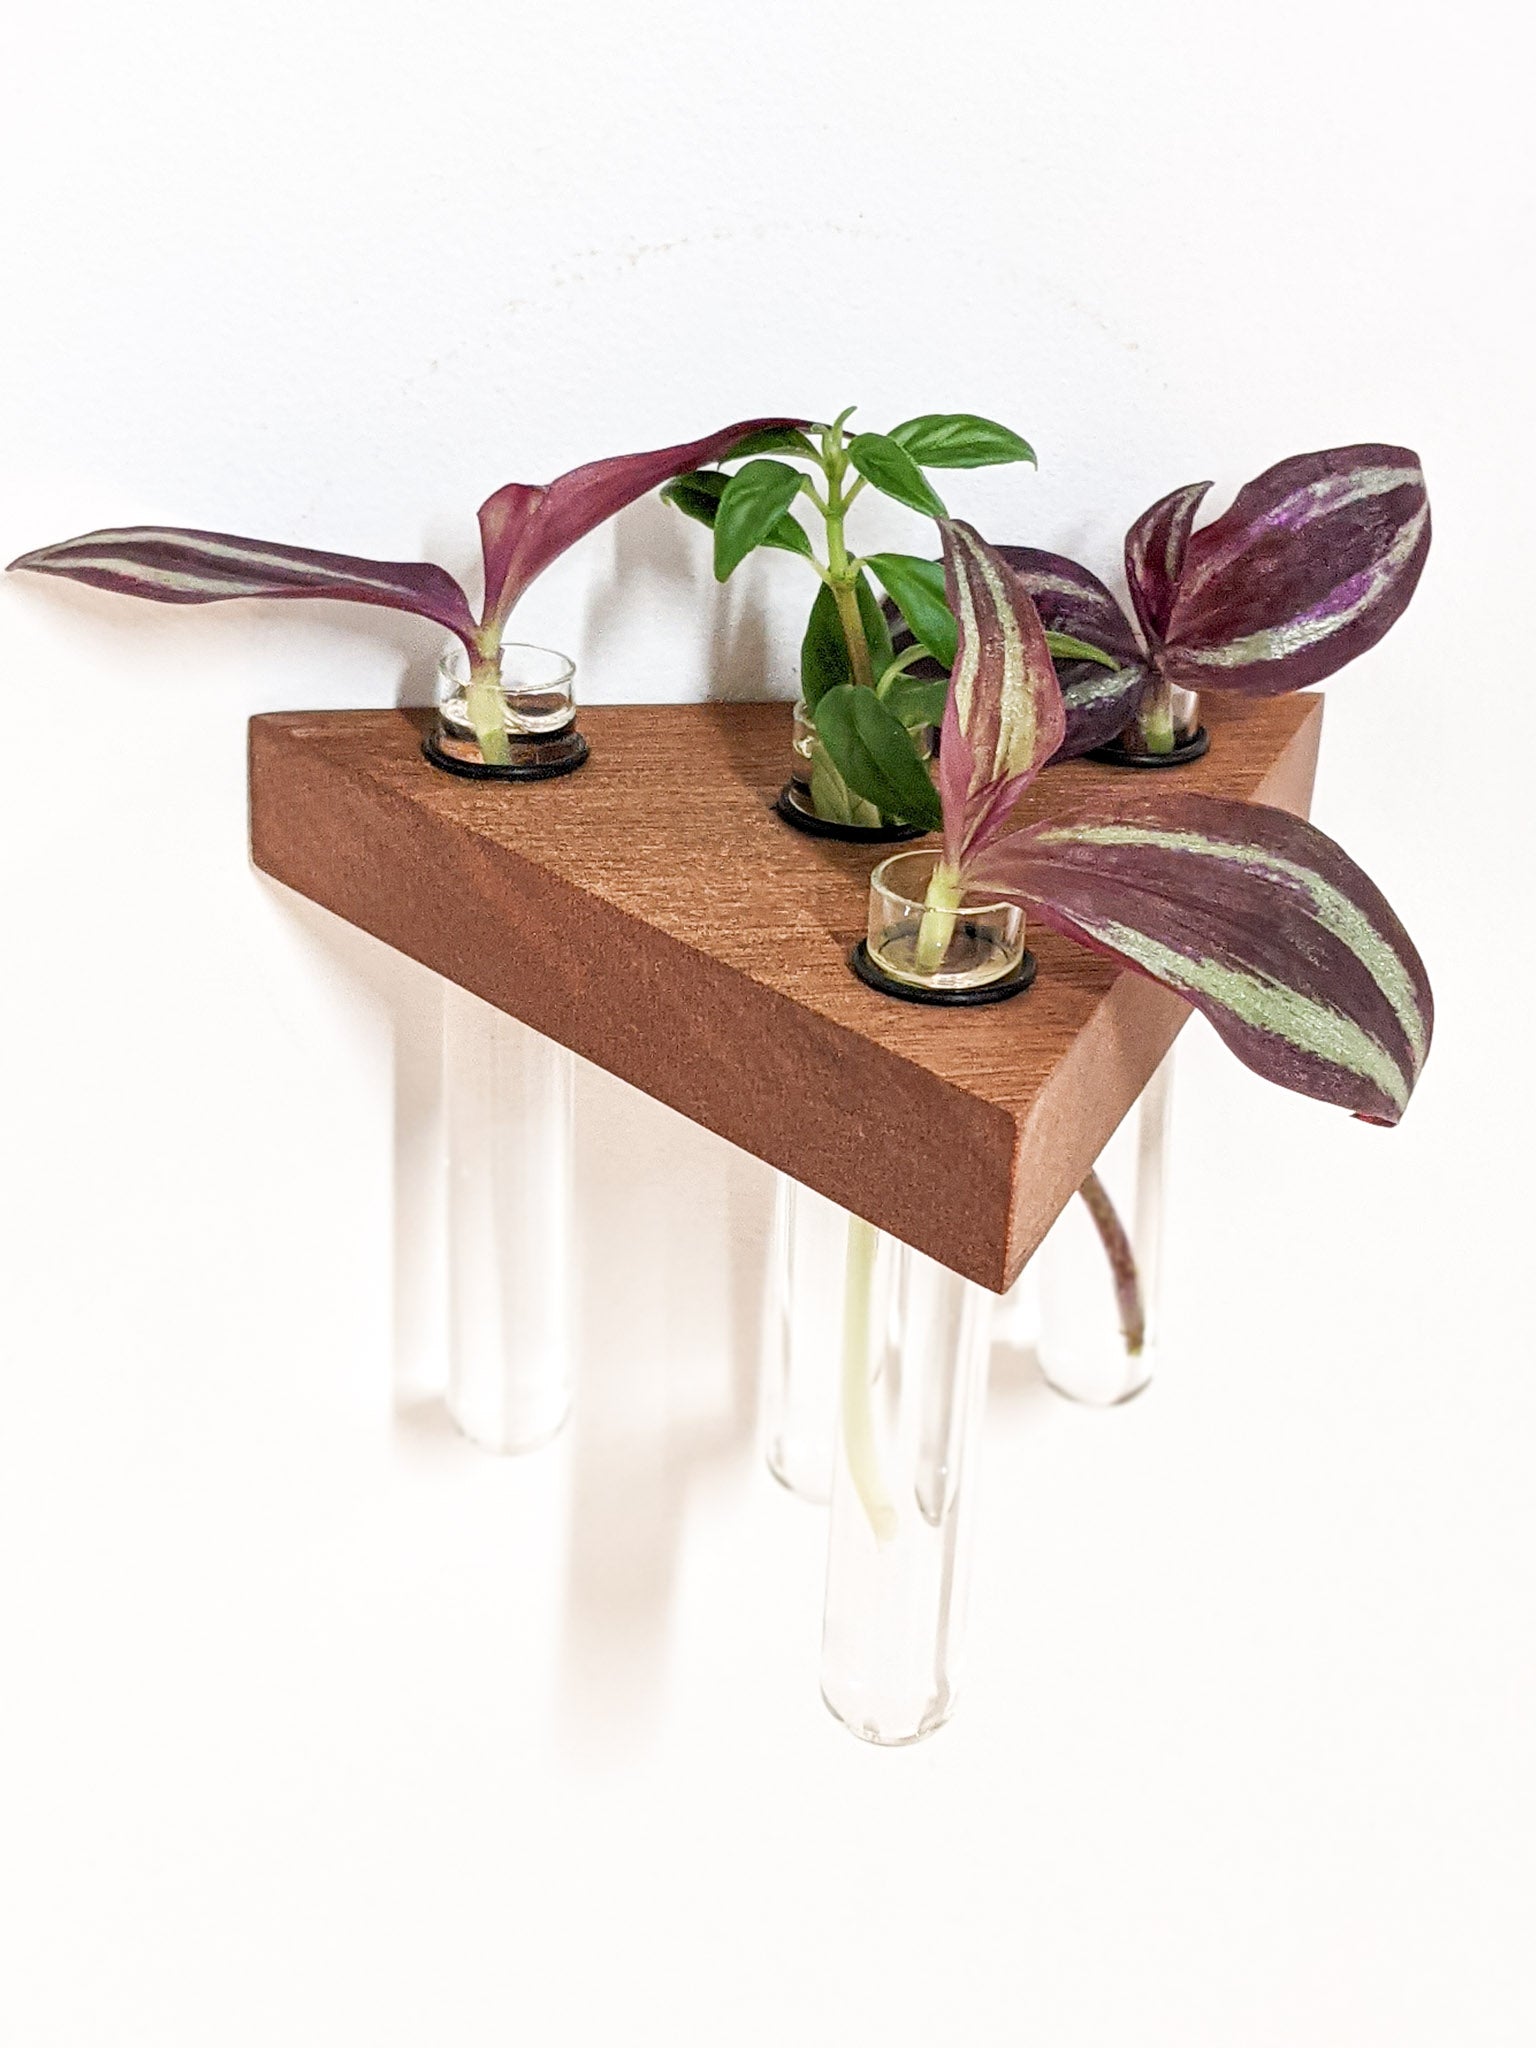 A top view of the triangle mahogany propagation floating shelf. Four cuttings of plants sit in four test tubes. The plants have purple and green leaves. The mahogany wood is dark brown and the edges are crisp. 